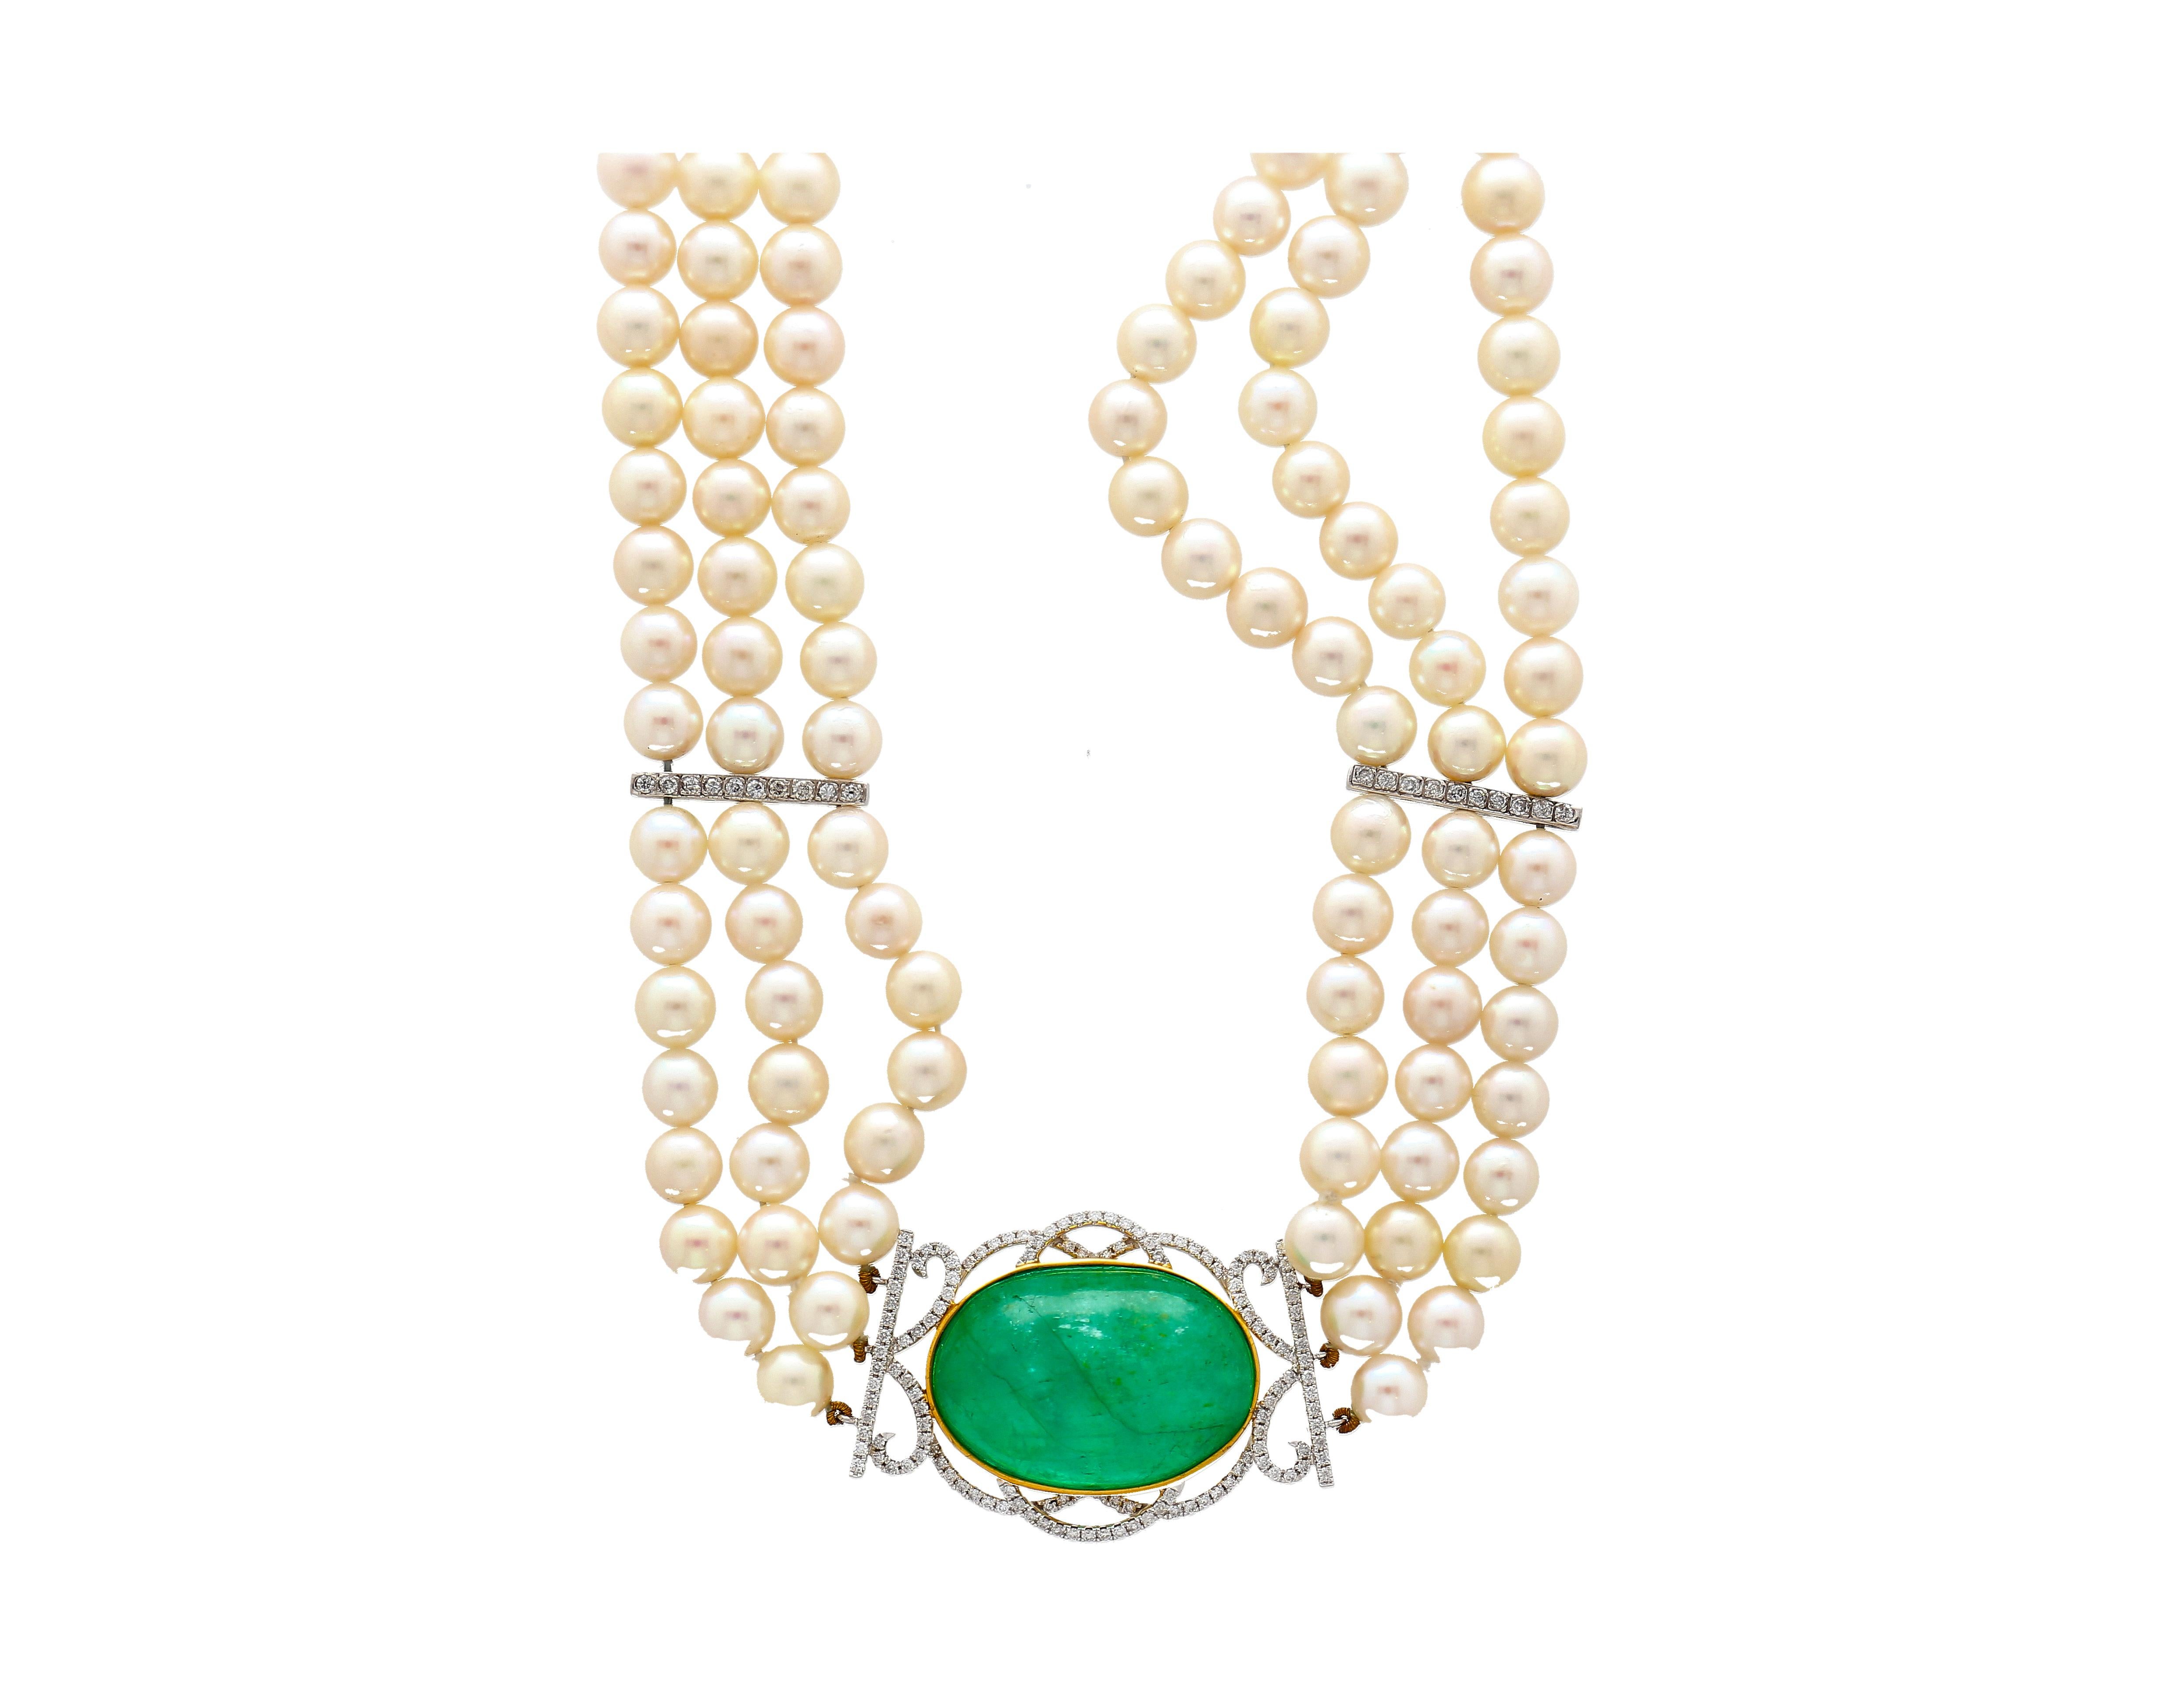 Cabochon Vintage Victorian Style Emerald And 3-Strand Pearl Pendant Choker Necklace For Sale